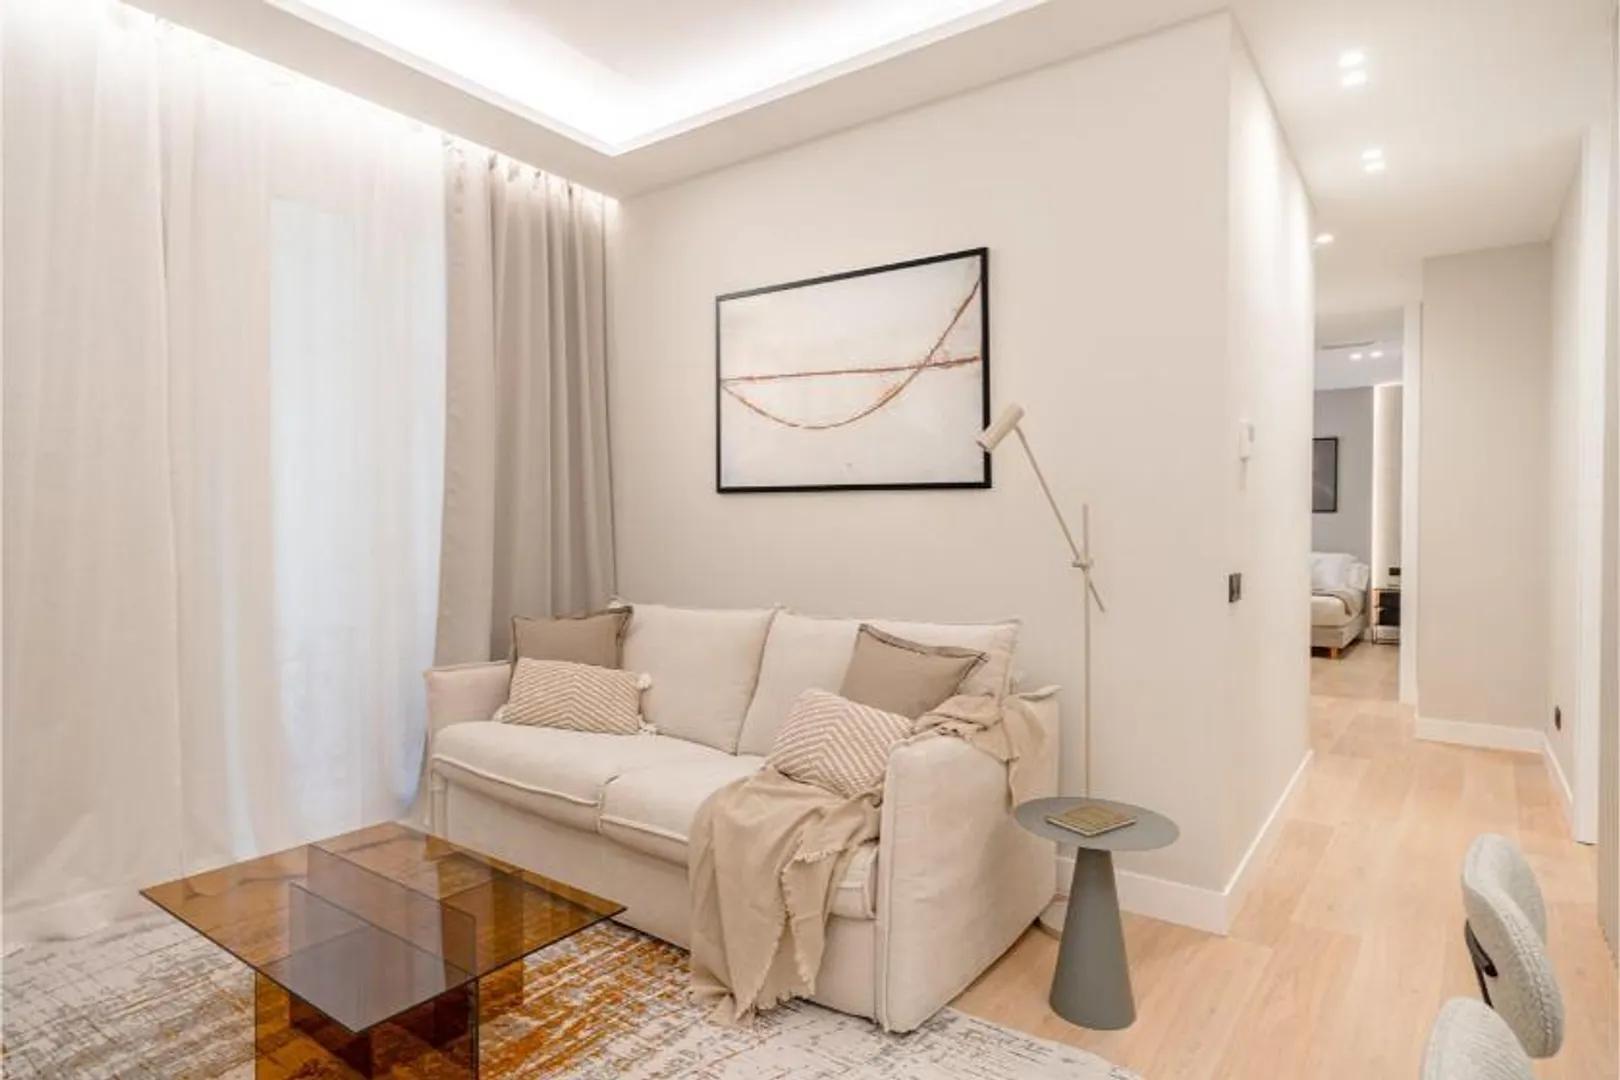 Turnkey apartment in the heart of Chueca